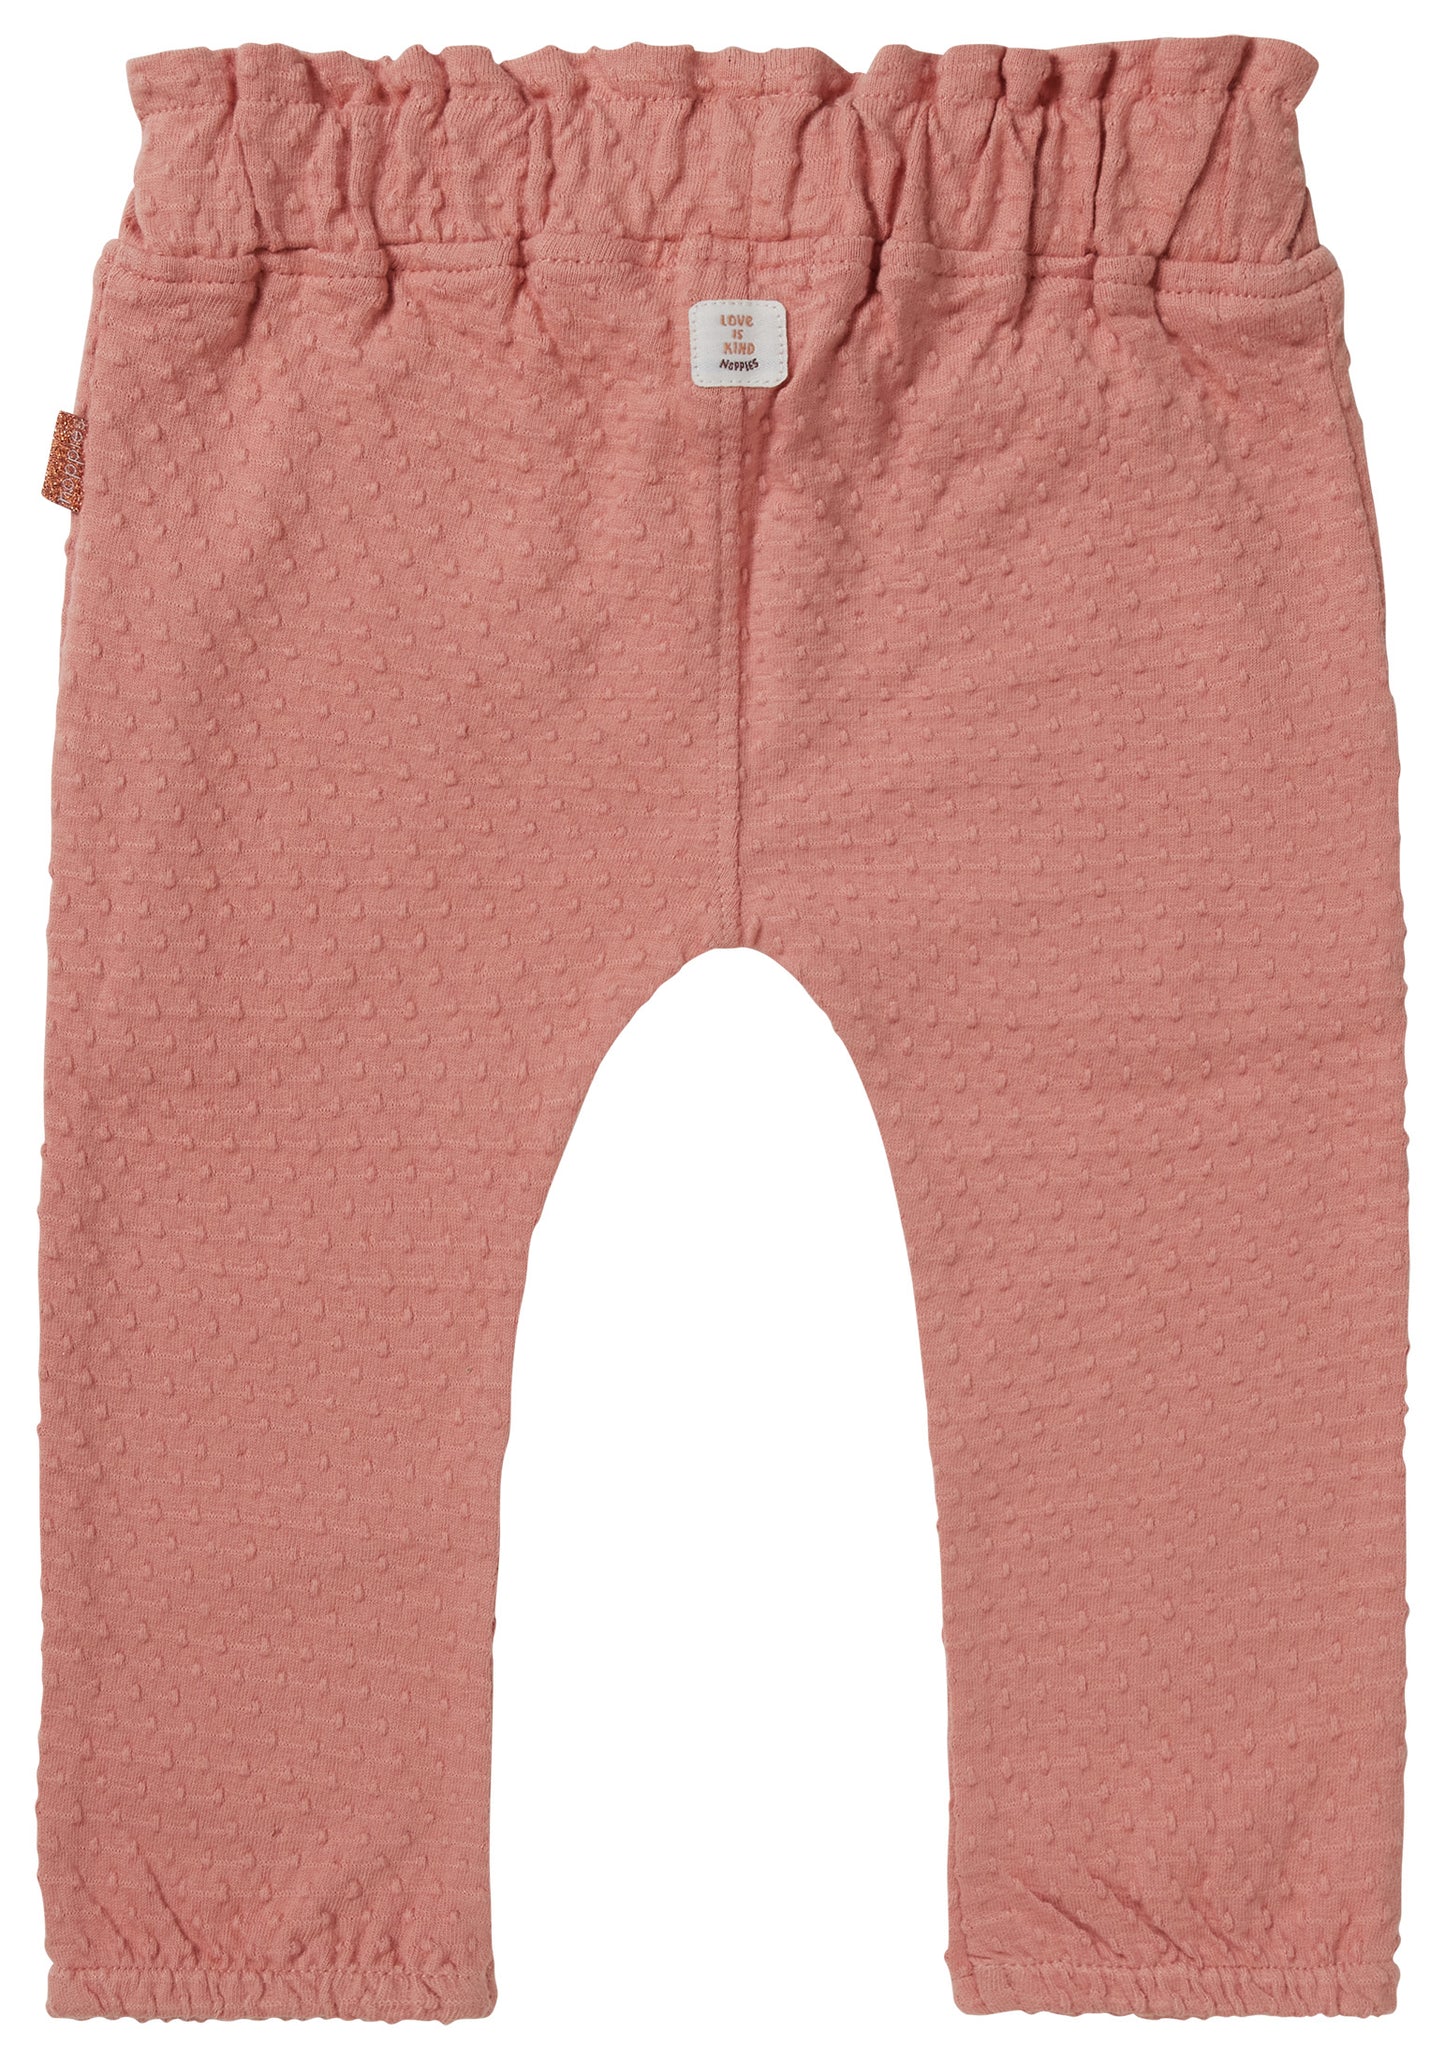 Girls pants Valinda relaxed fit